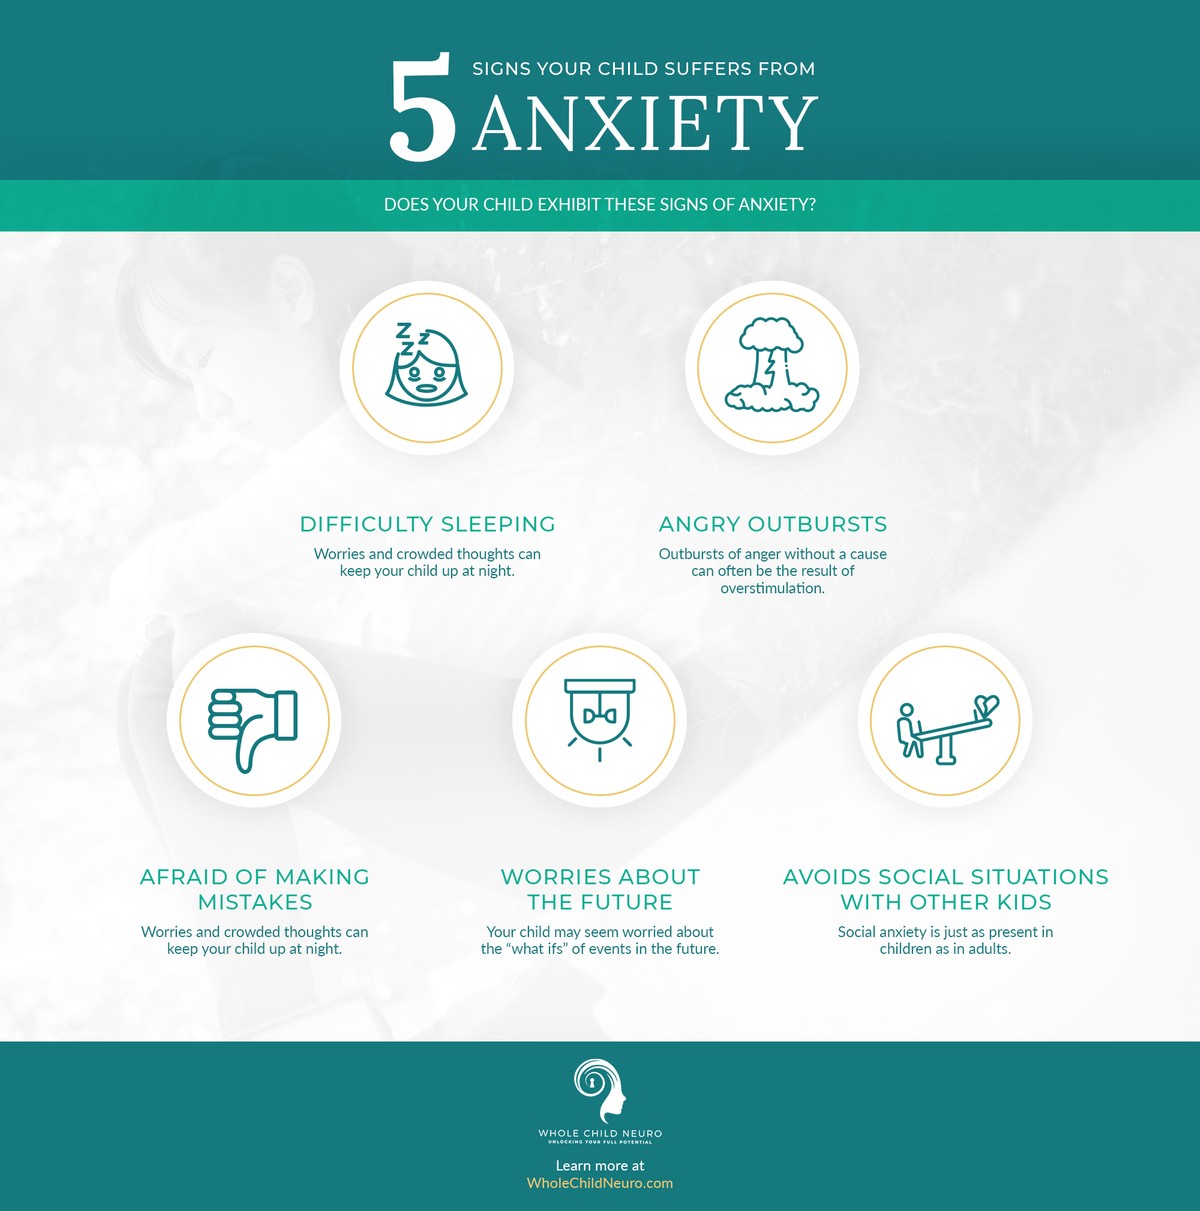 5 Signs Your Child Suffers From Anxiety.jpg